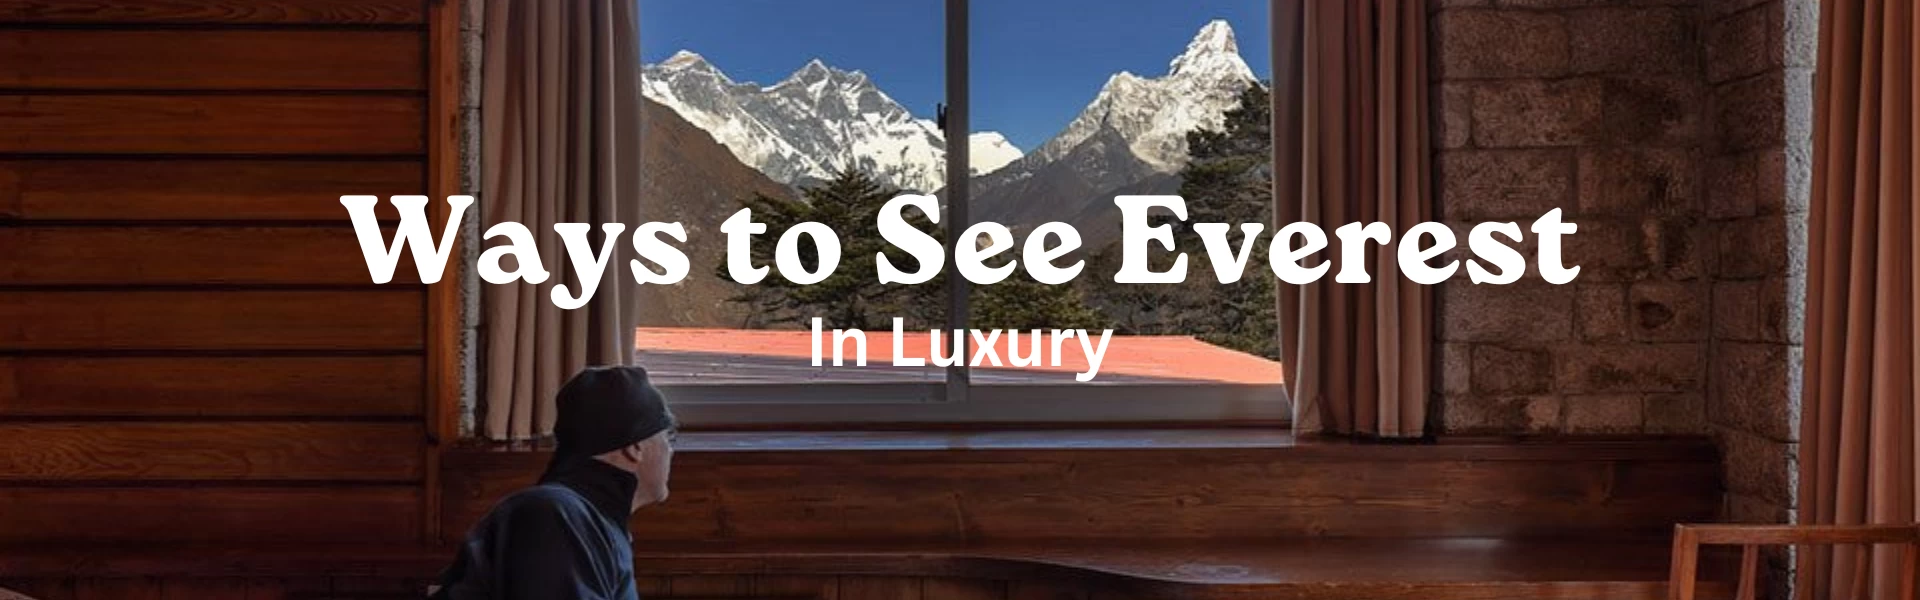 way to see everest in luxury